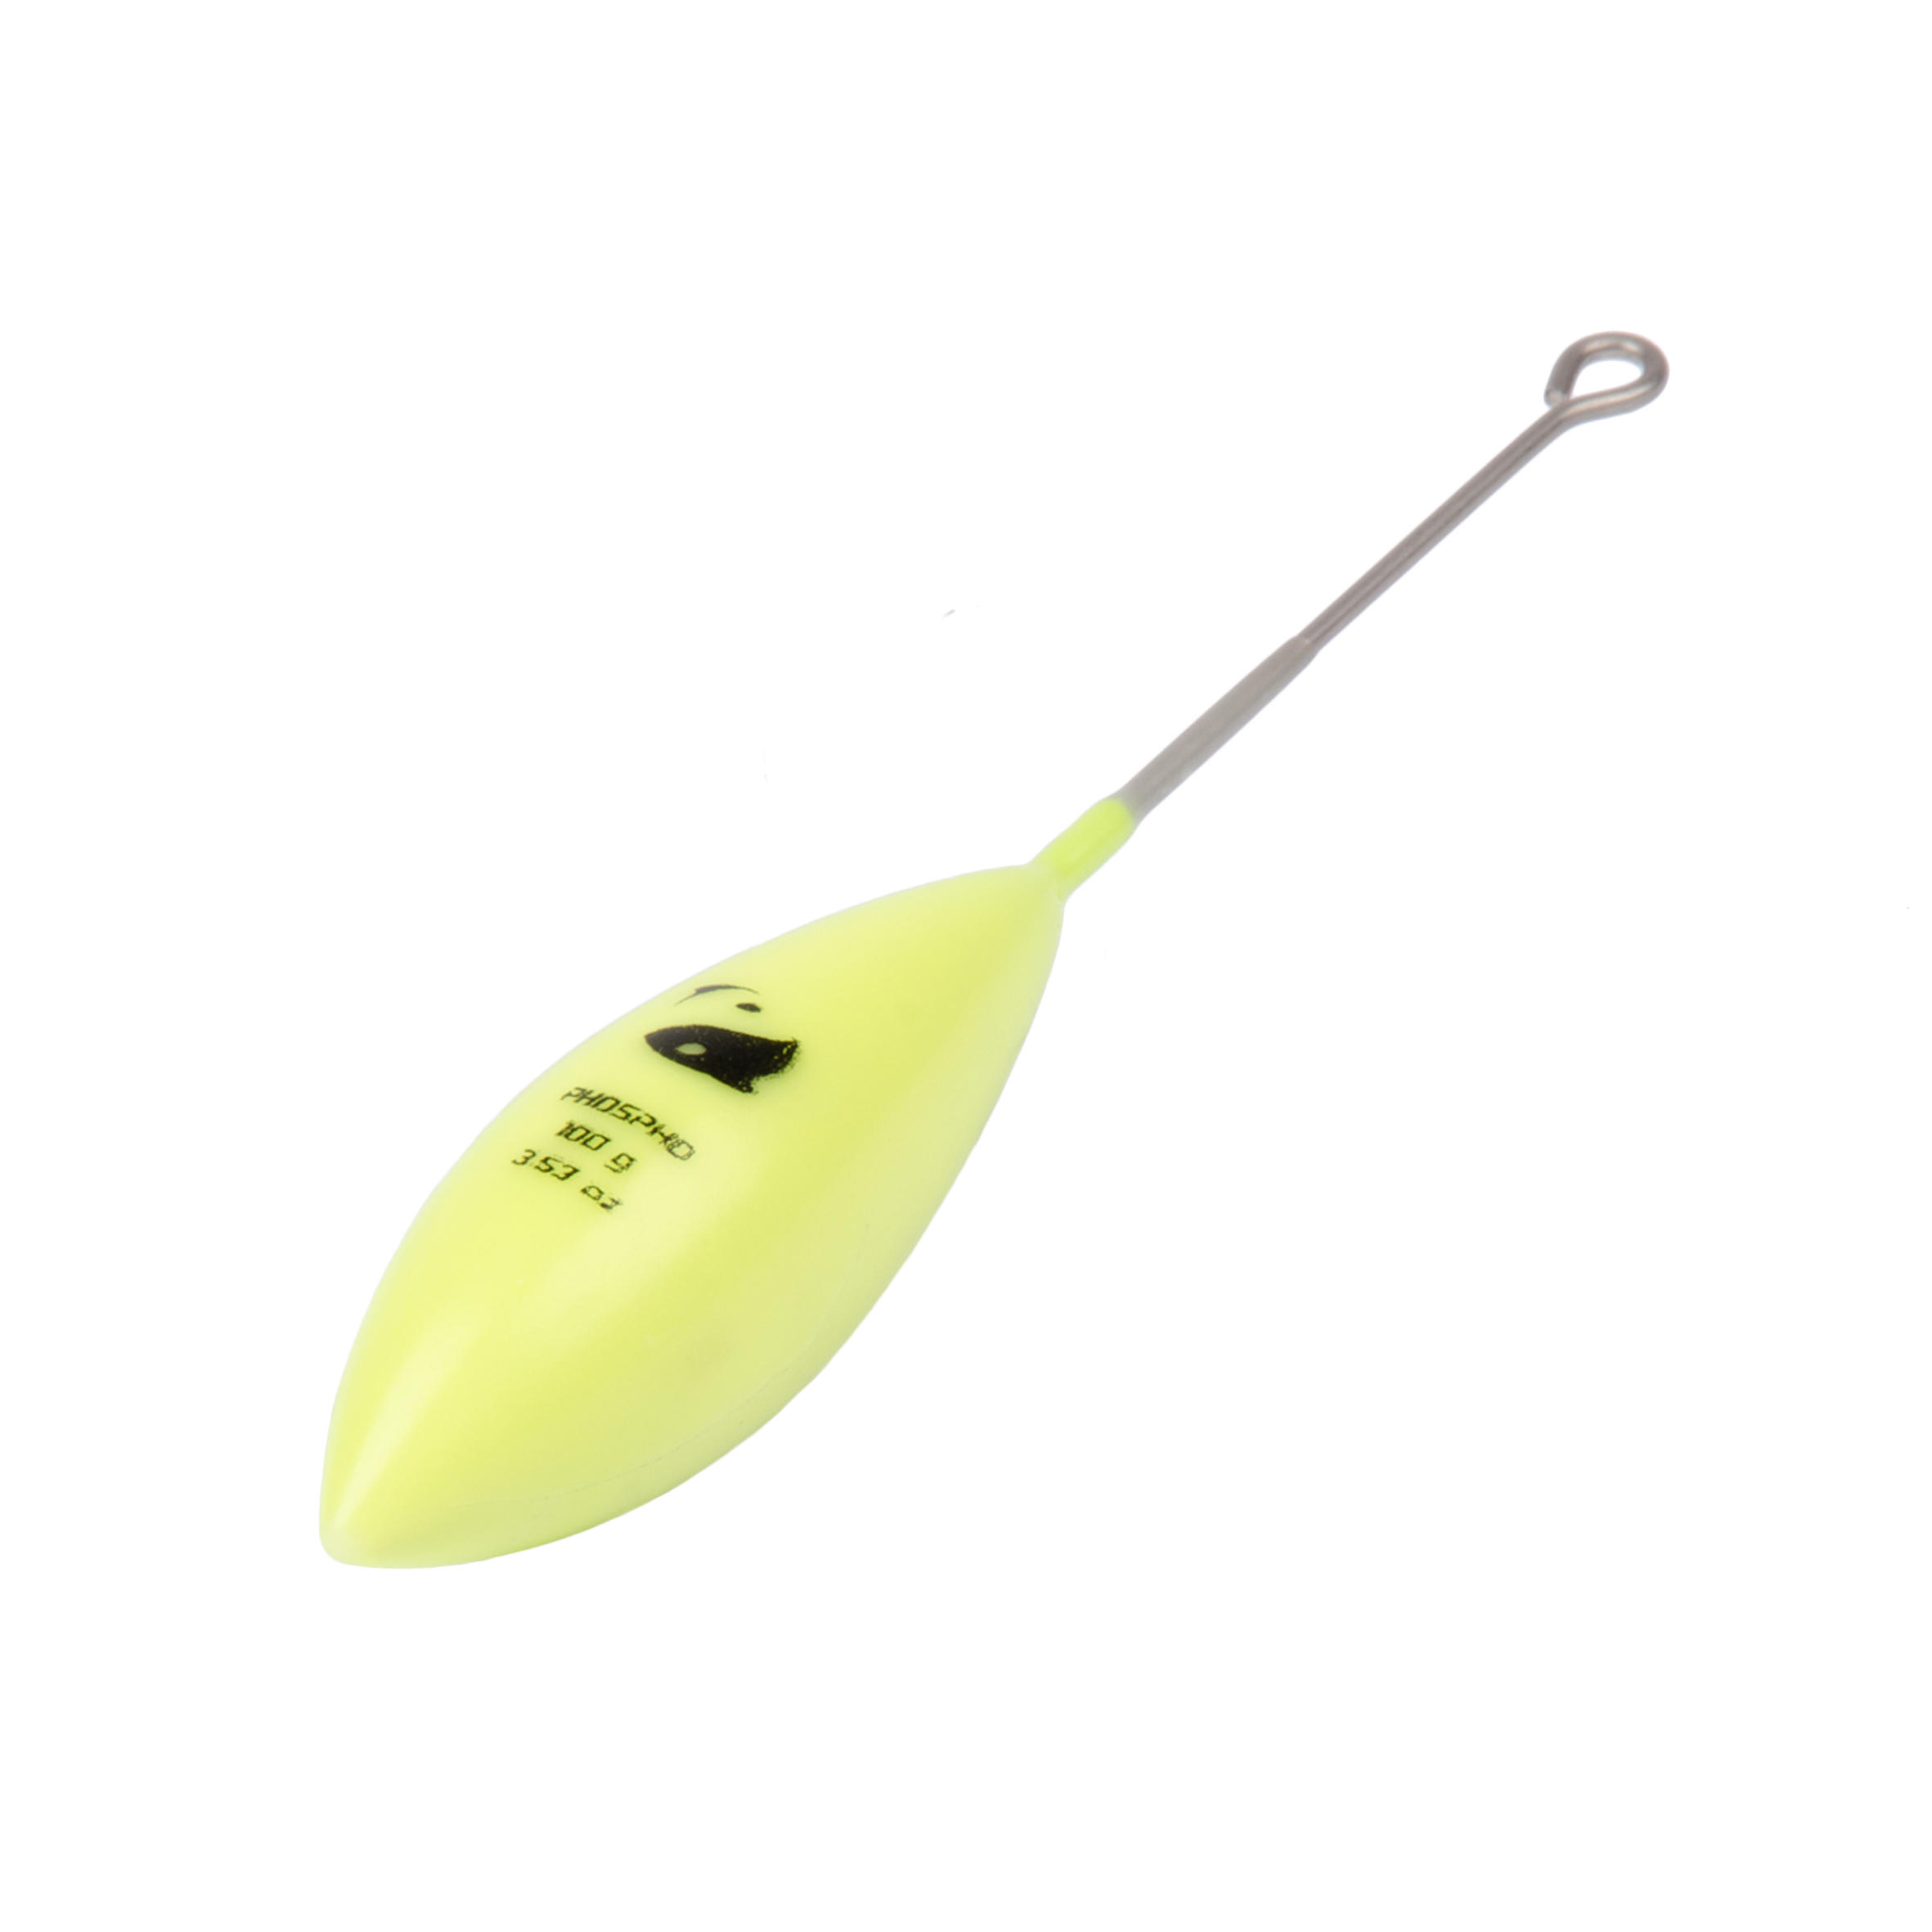 Fishing Surfcasting Bomb Sinker with Long Tail x2 - Phosphorescent Yellow 5/10